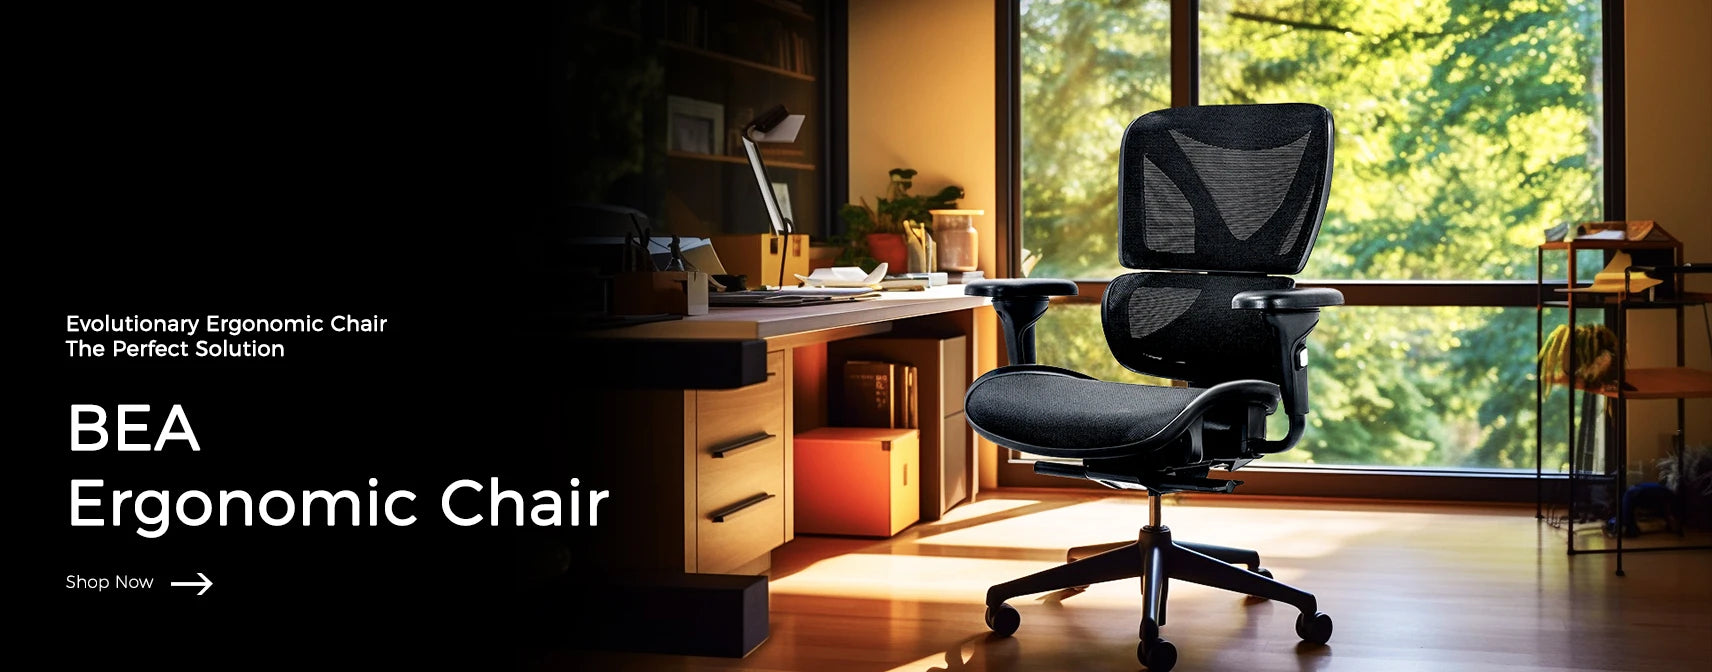 Brightly lit home office space with a scenic view of trees through a large window. Centered is the "BEA Ergonomic Chair" with mesh backrest and padded seat. The workspace features a wooden desk, various stationery items, a lamp, and organized storage. The caption reads "Evolutionary Ergonomic Chair - The Perfect Solution." A "Shop Now" button suggests product availability.